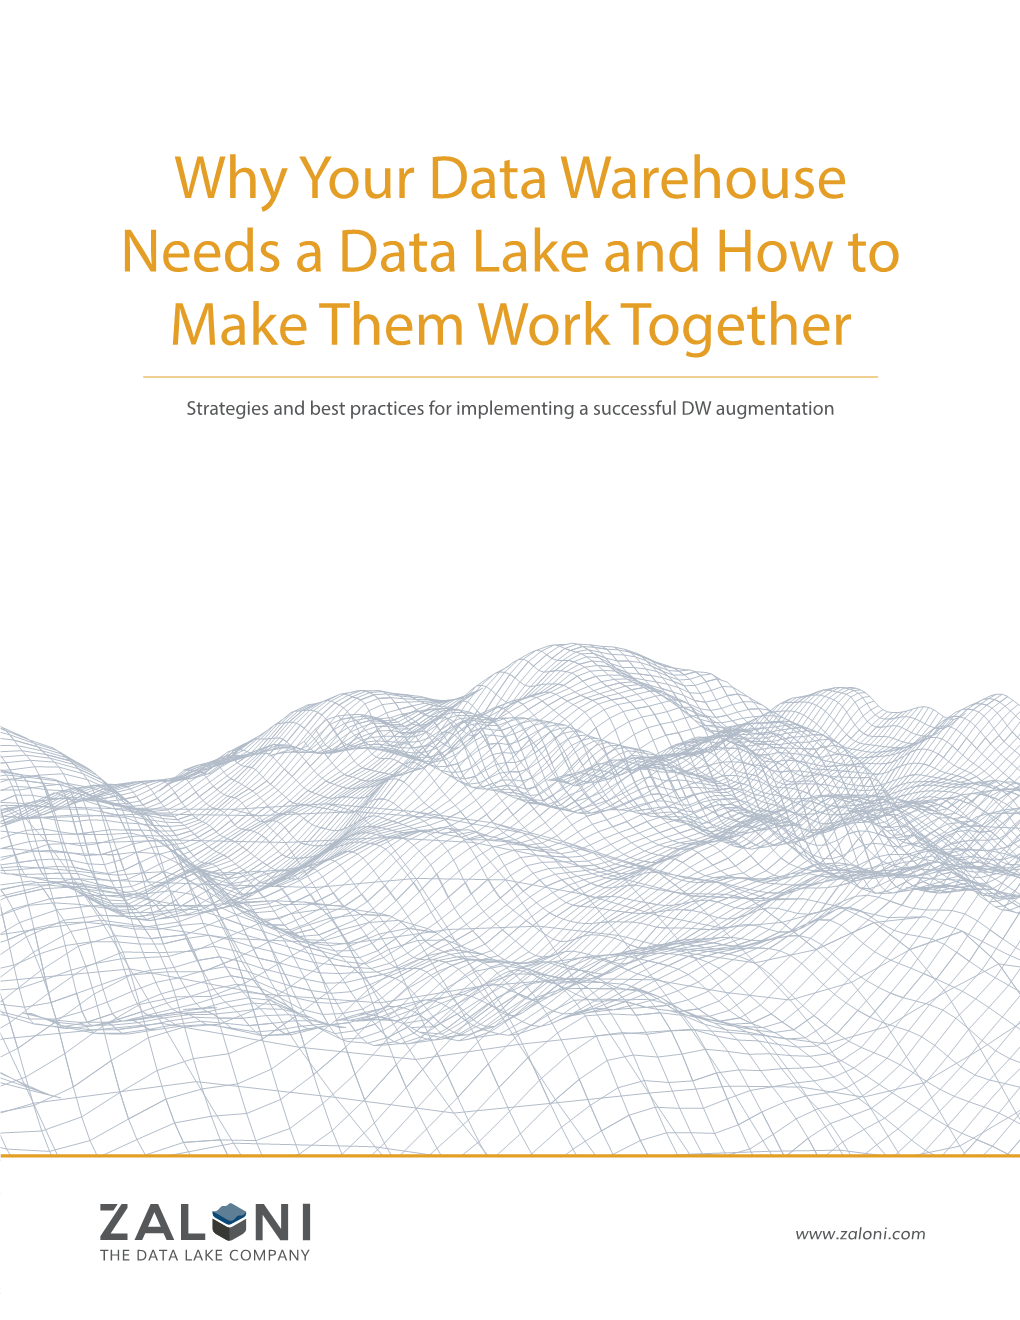 Why Your Data Warehouse Needs a Data Lake and How to Make Them Work Together